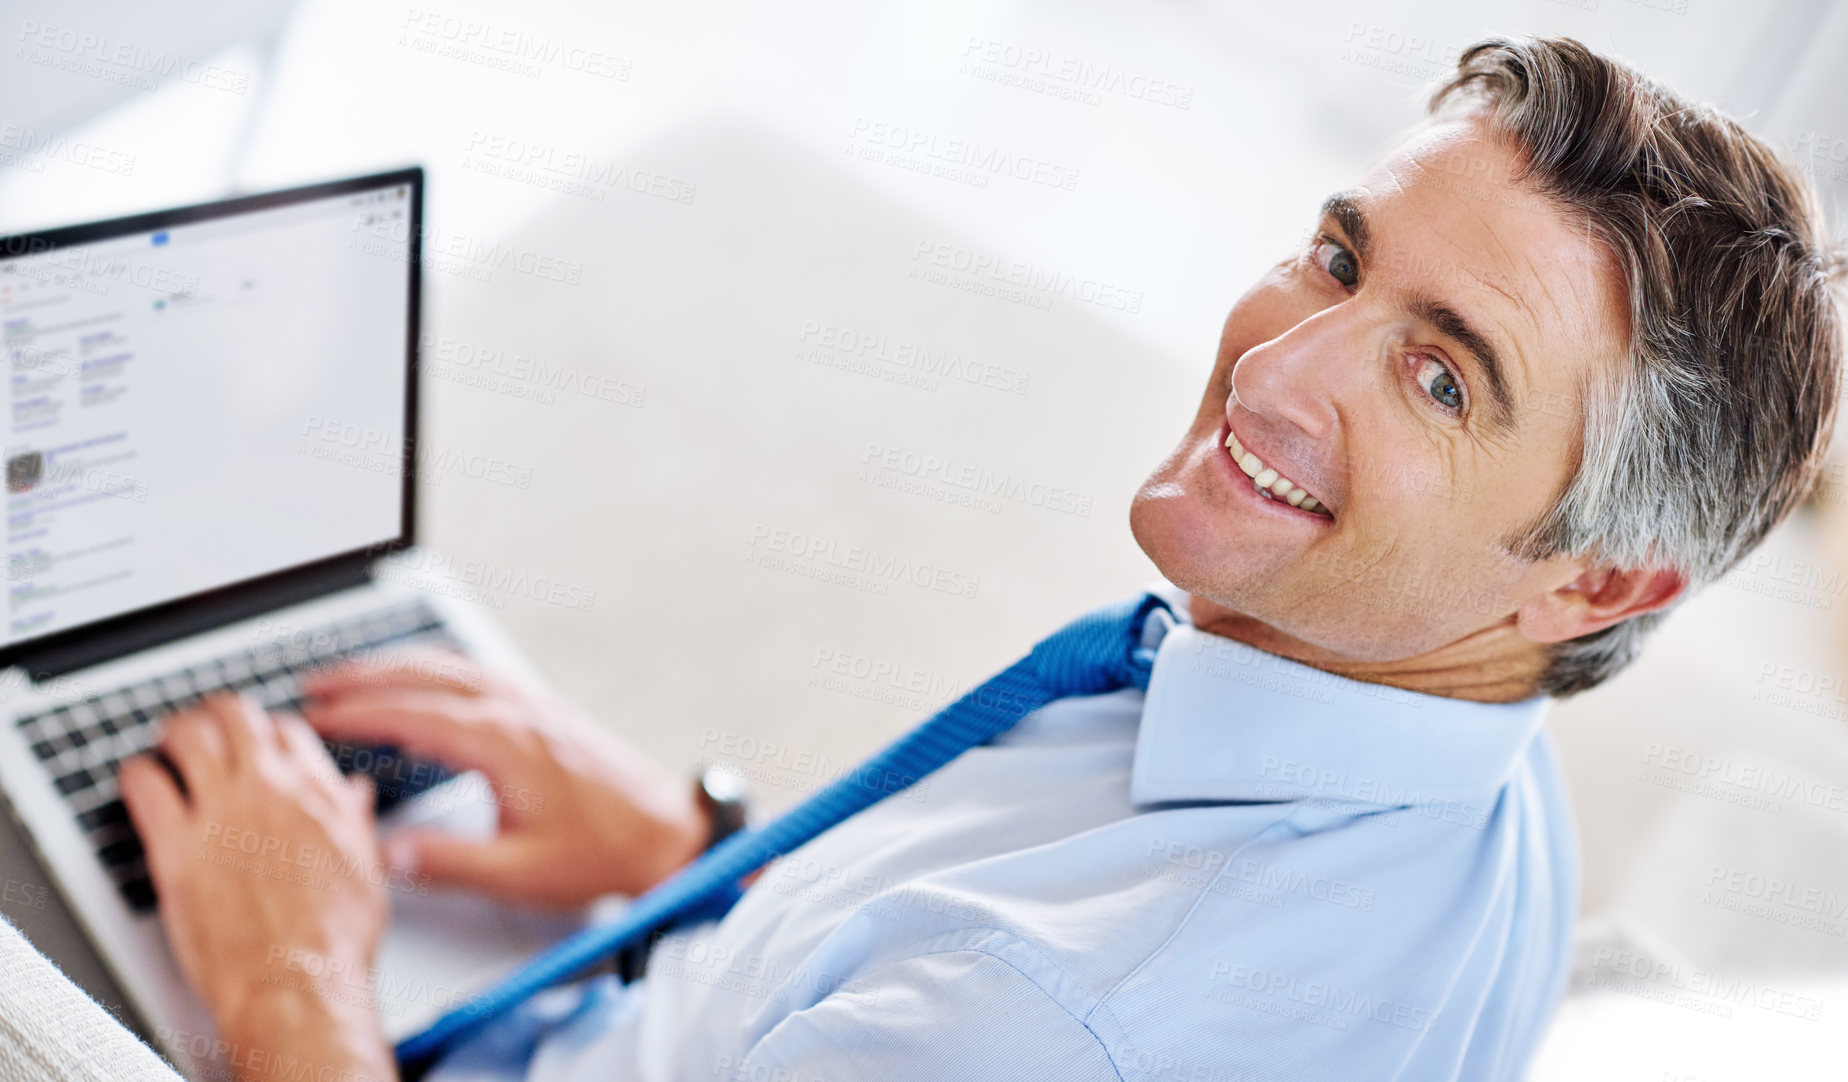 Buy stock photo Portrait of a mature businessman using a laptop while sitting on a sofa